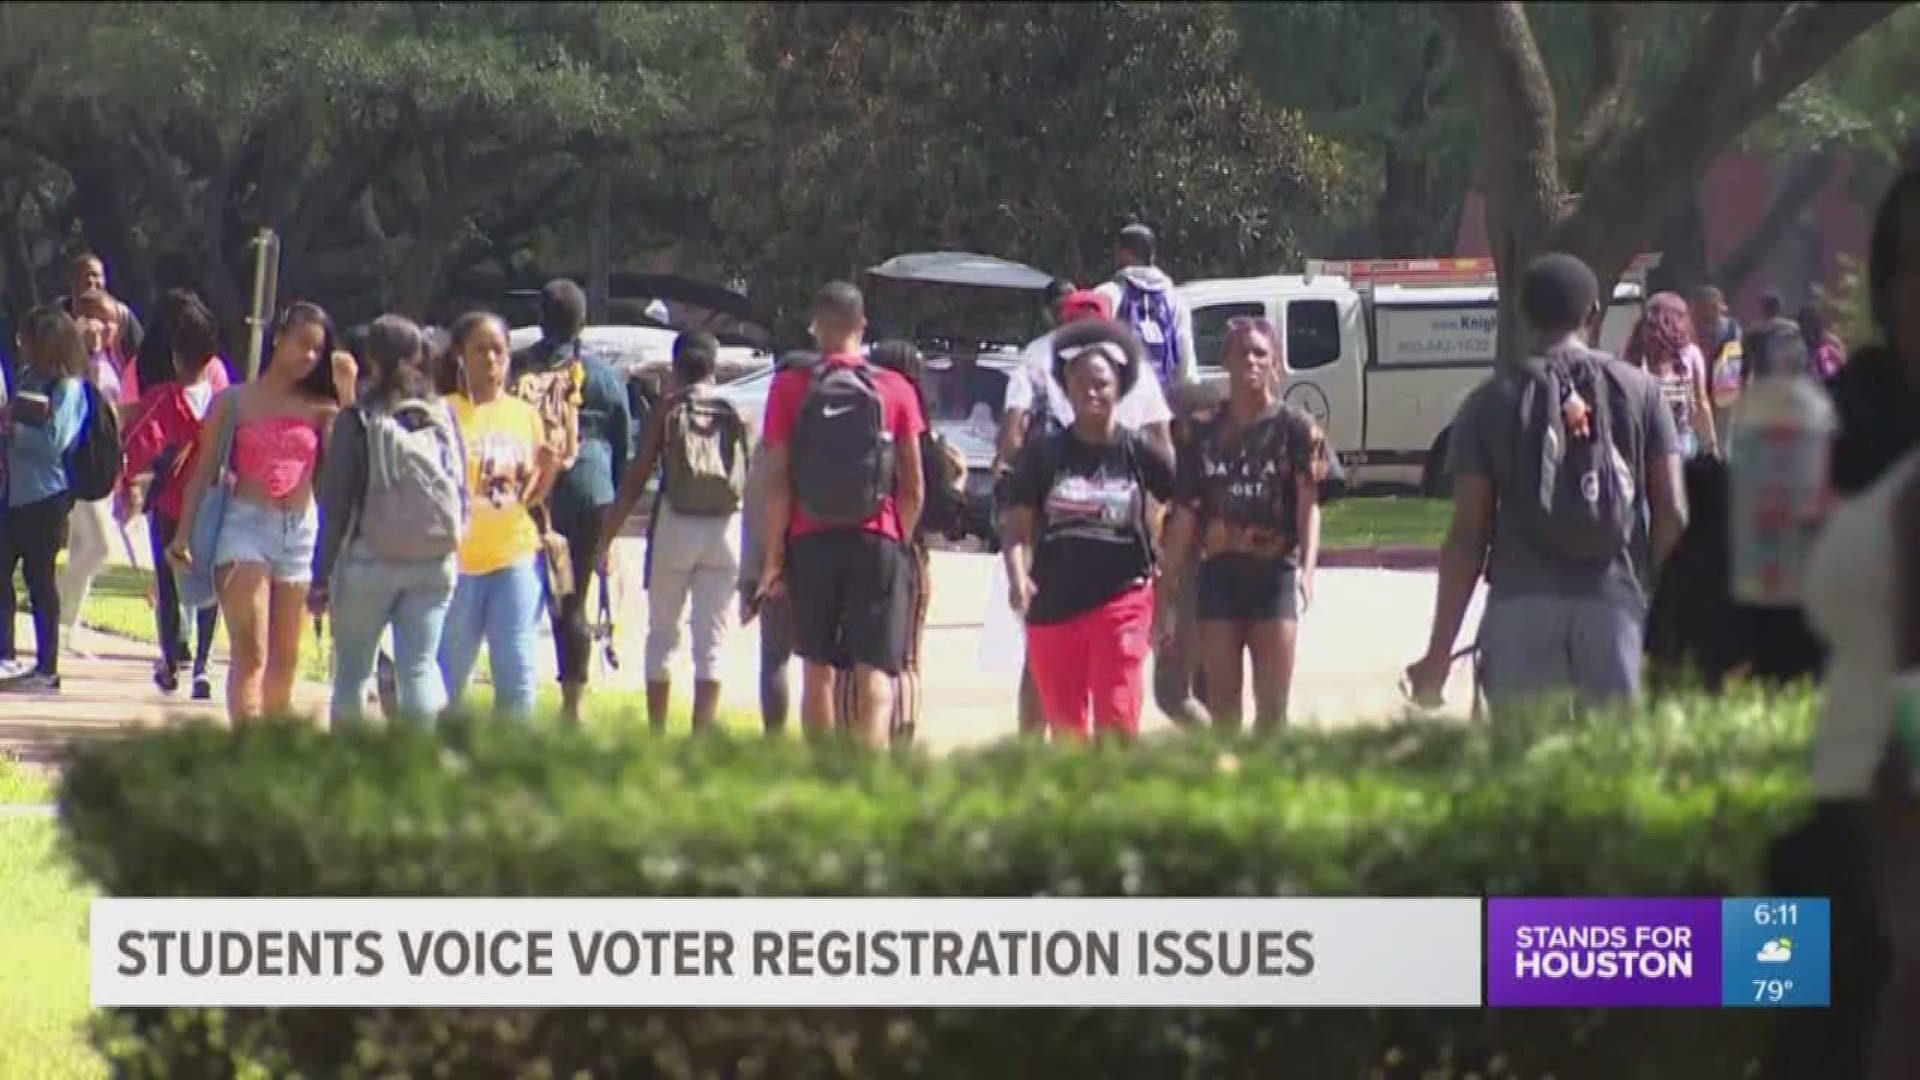 Waller County officials promise votes at Prairie View A&M University are not being suppressed. That's despite fears spread on social media and an admitted address mix-up.